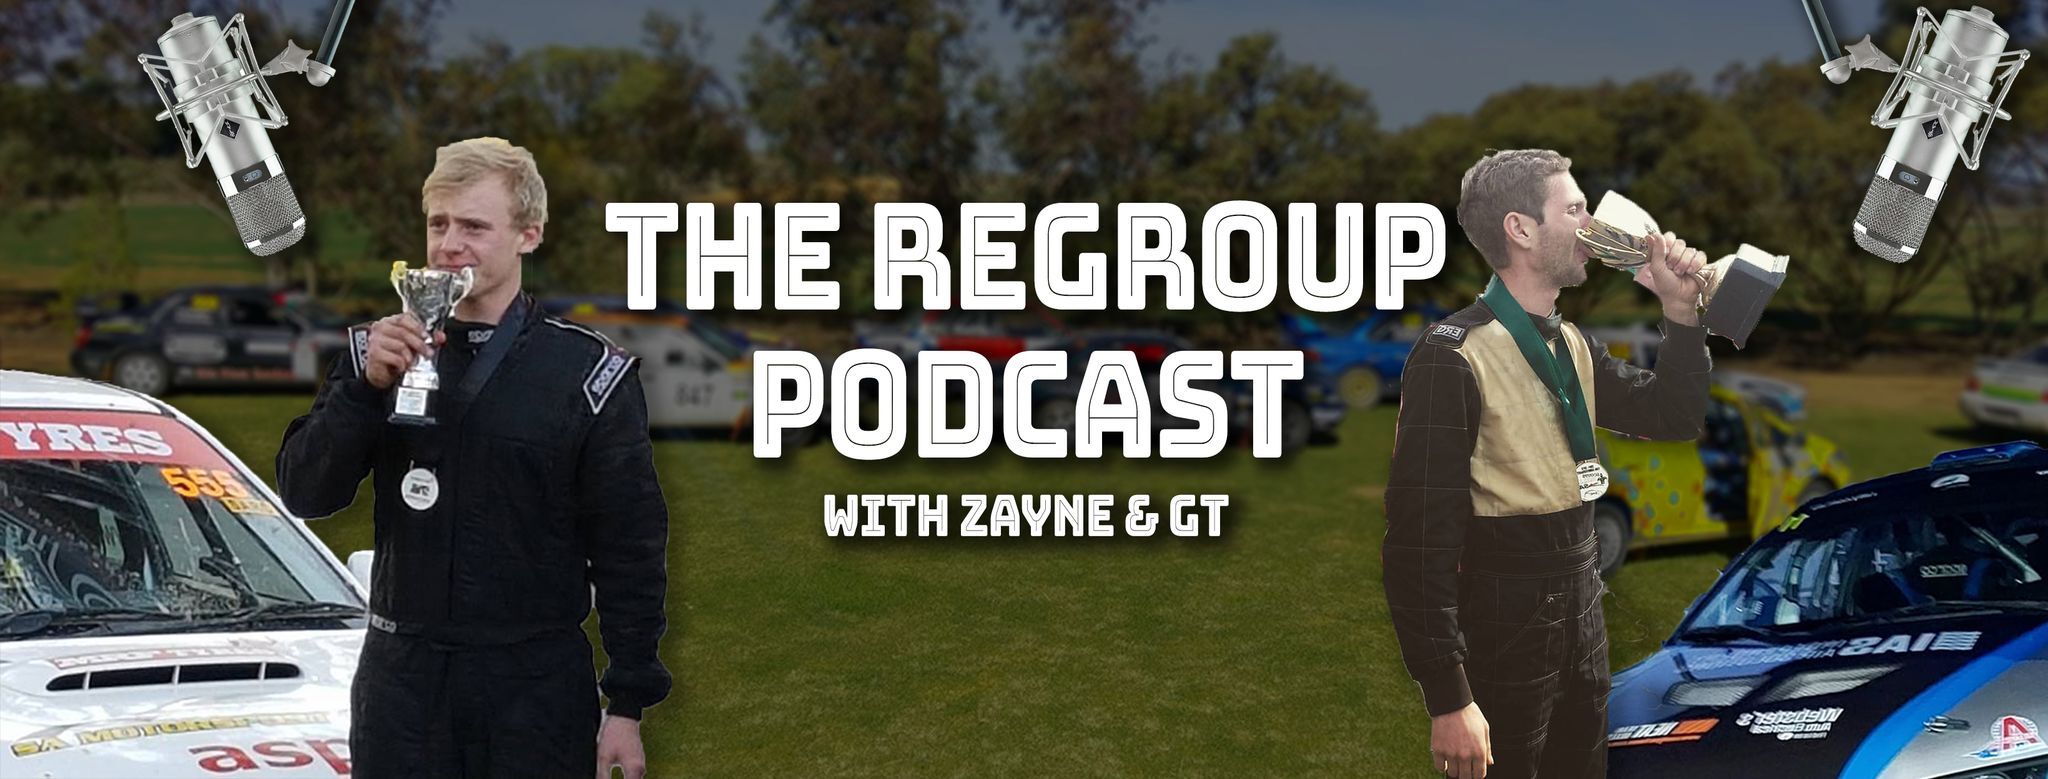 The Regroup with Zayne & GT